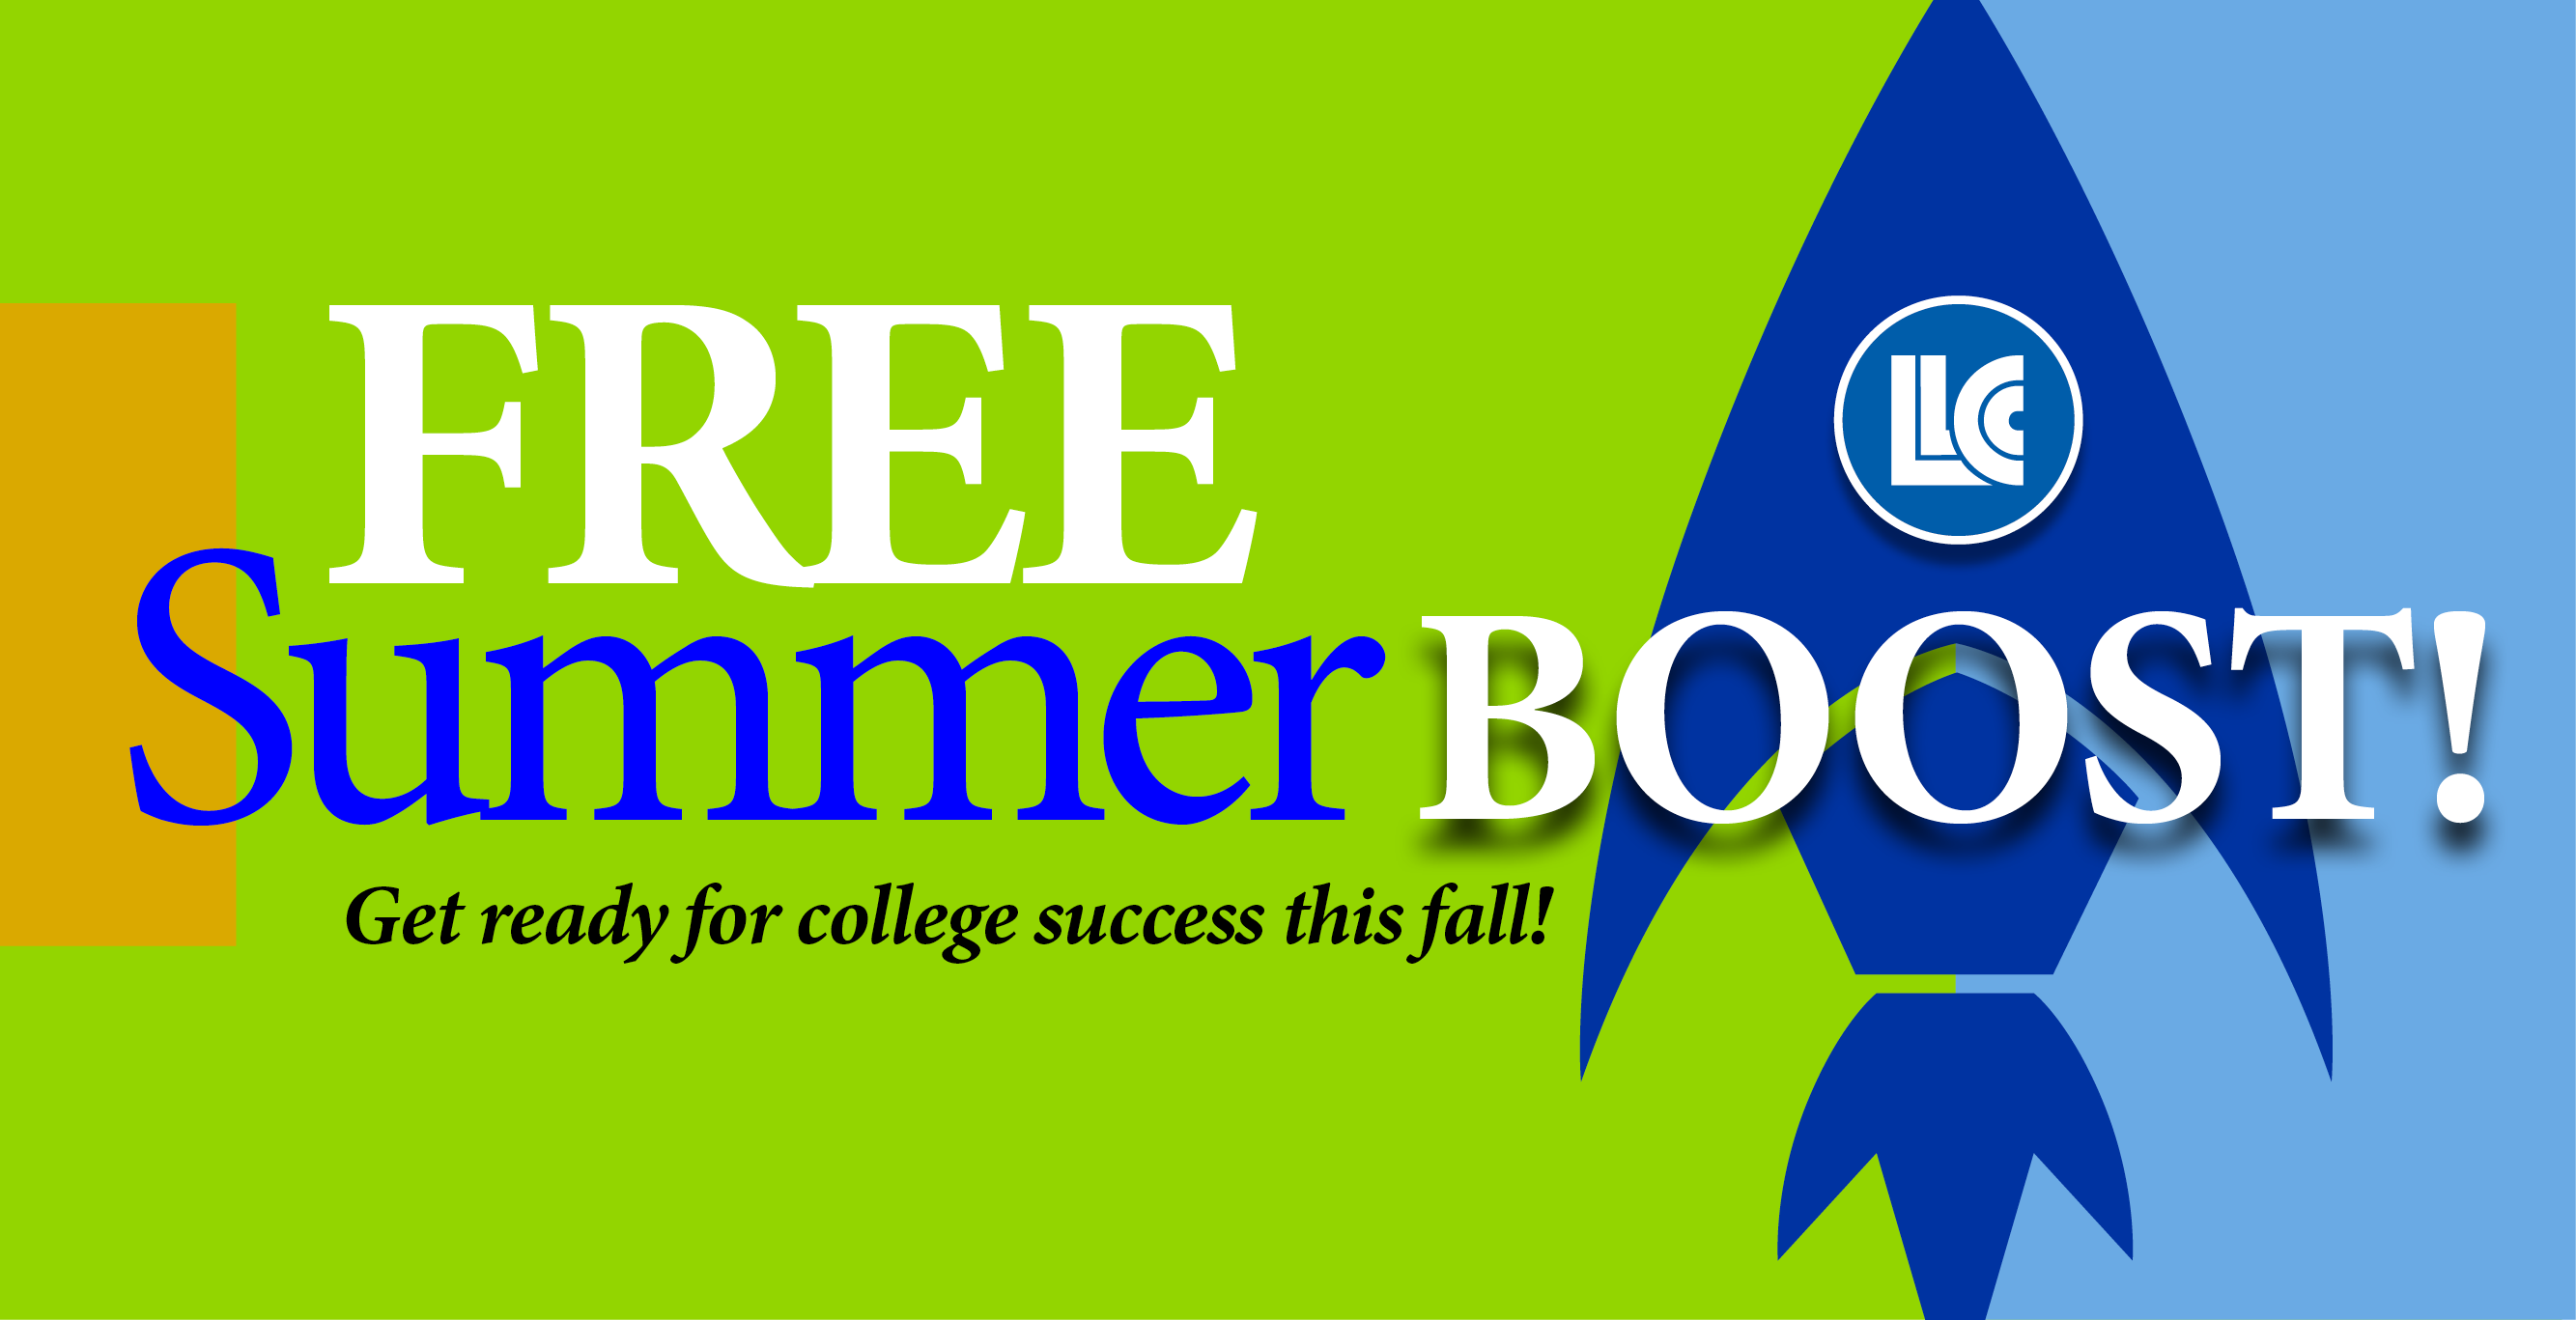 LLCC. FREE Summer Boost! Get ready for college success this fall!